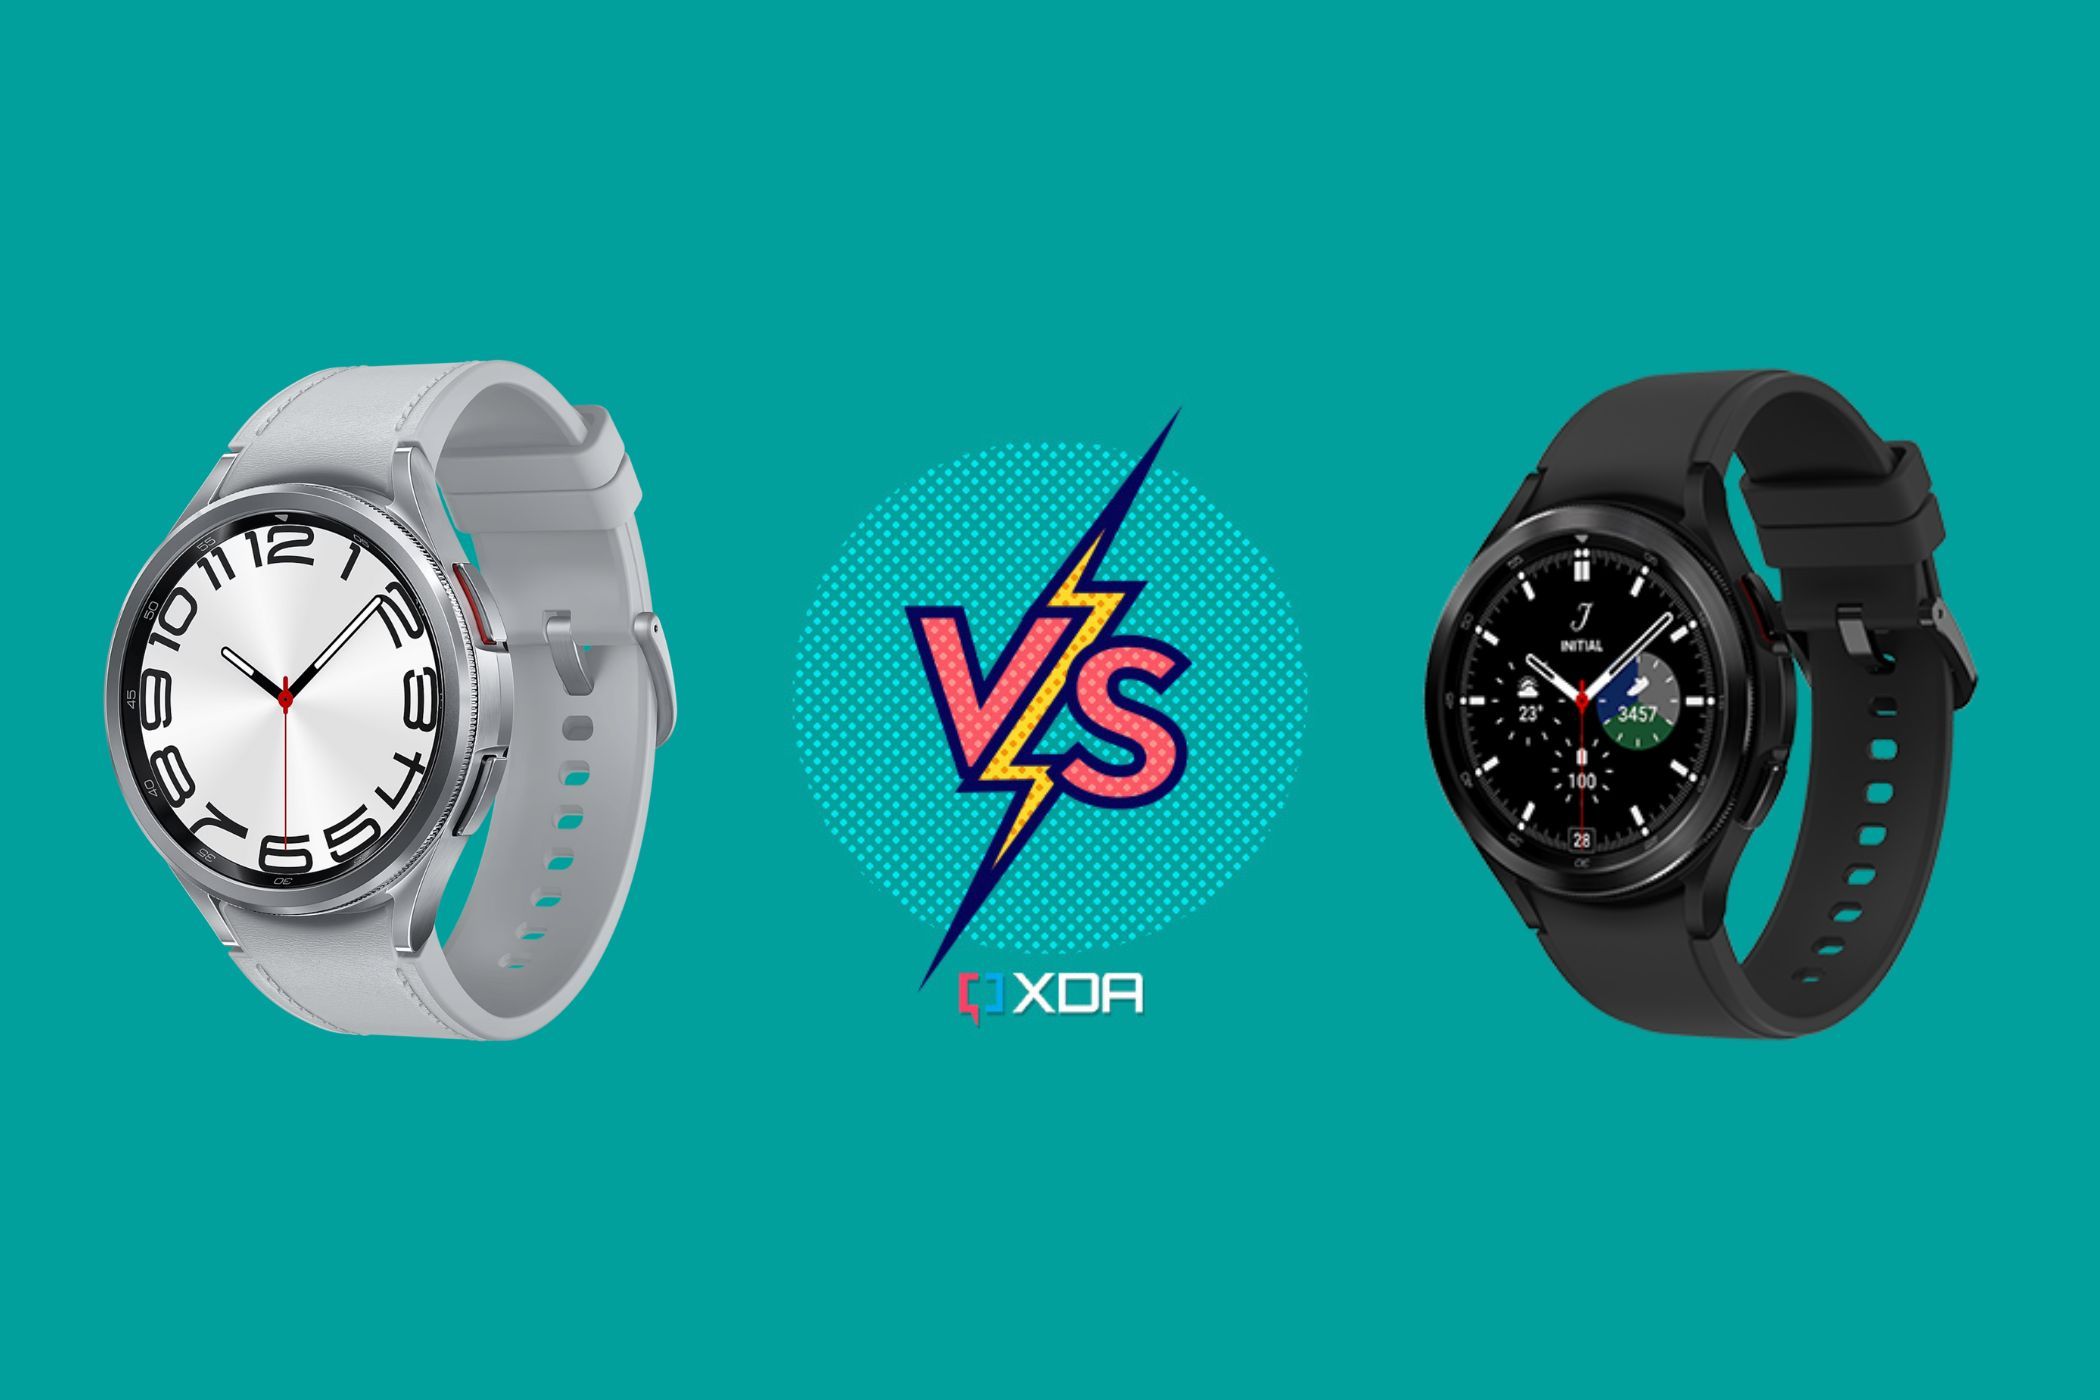 A render showing Samsung Galaxy Watch 6 Classic next to a Galaxy Watch 4 Classic over a green-colored background with a versus illustration in the middle.